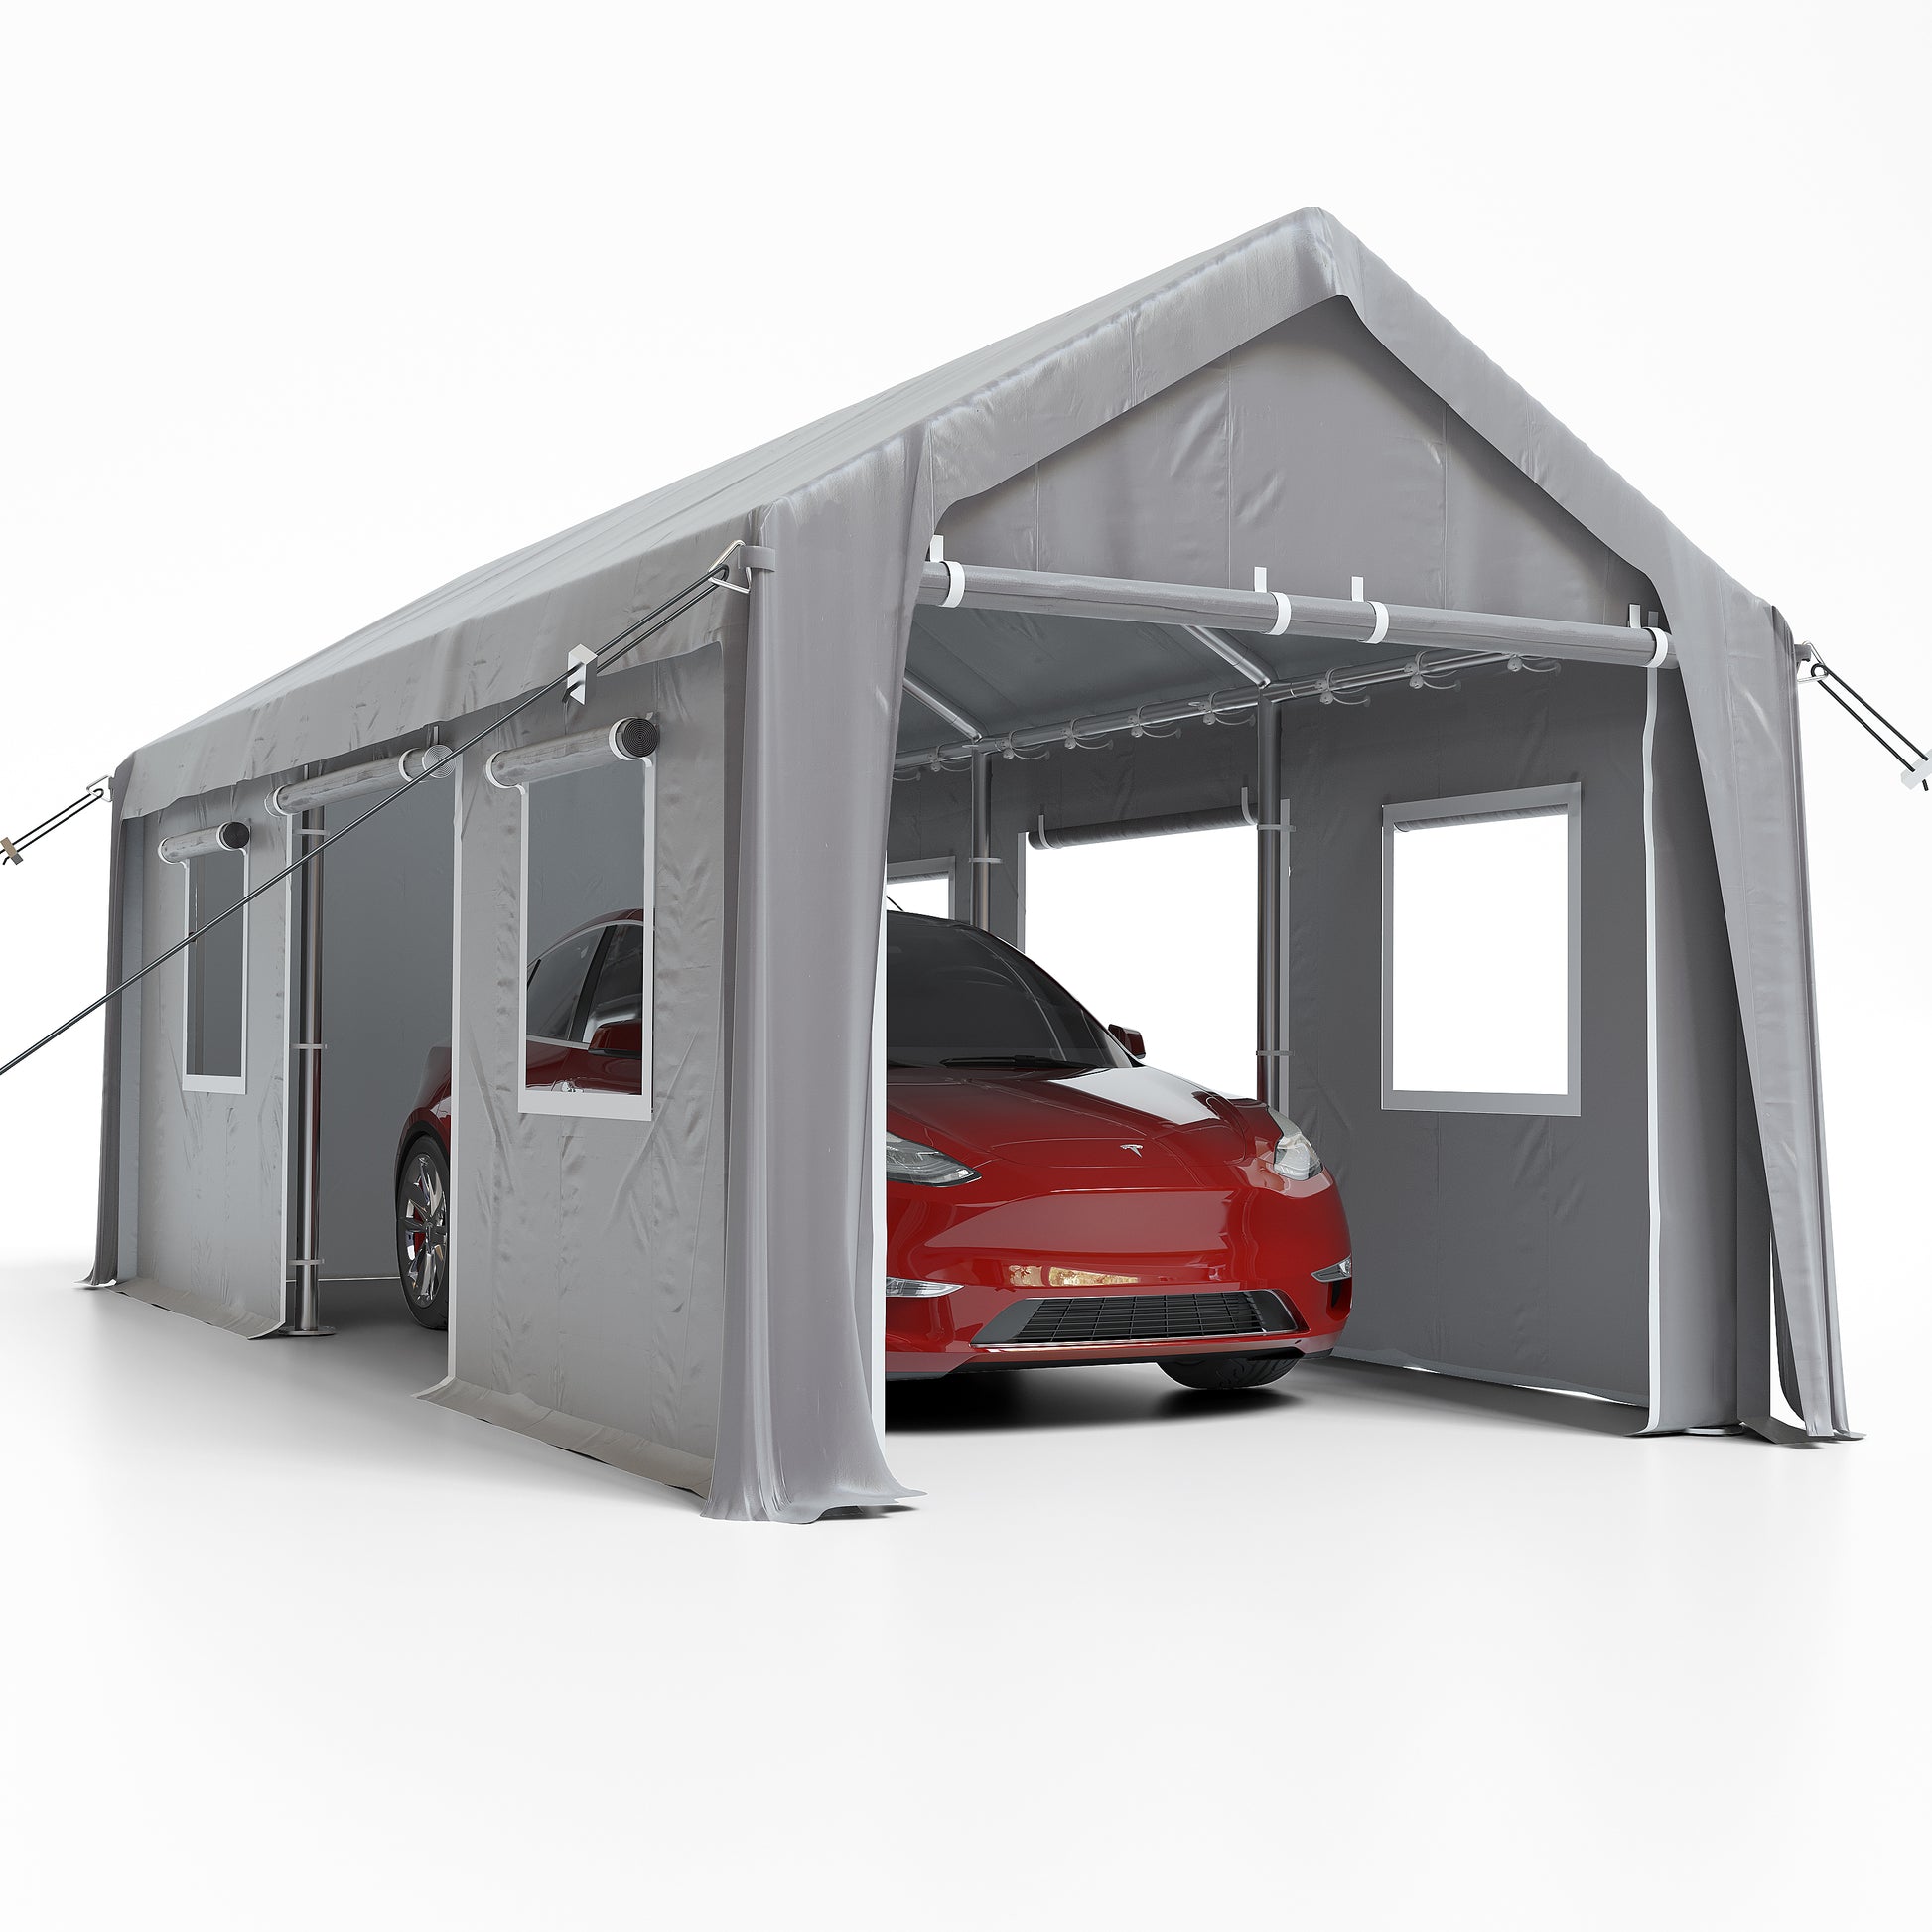 Carport, 10'x20' Heavy Duty Carport with Roll-up Ventilated Windows & Doors, Heavy Duty Carport Canopy, Height Adjustable Portable Garage for Car, Truck, Boat, Party White